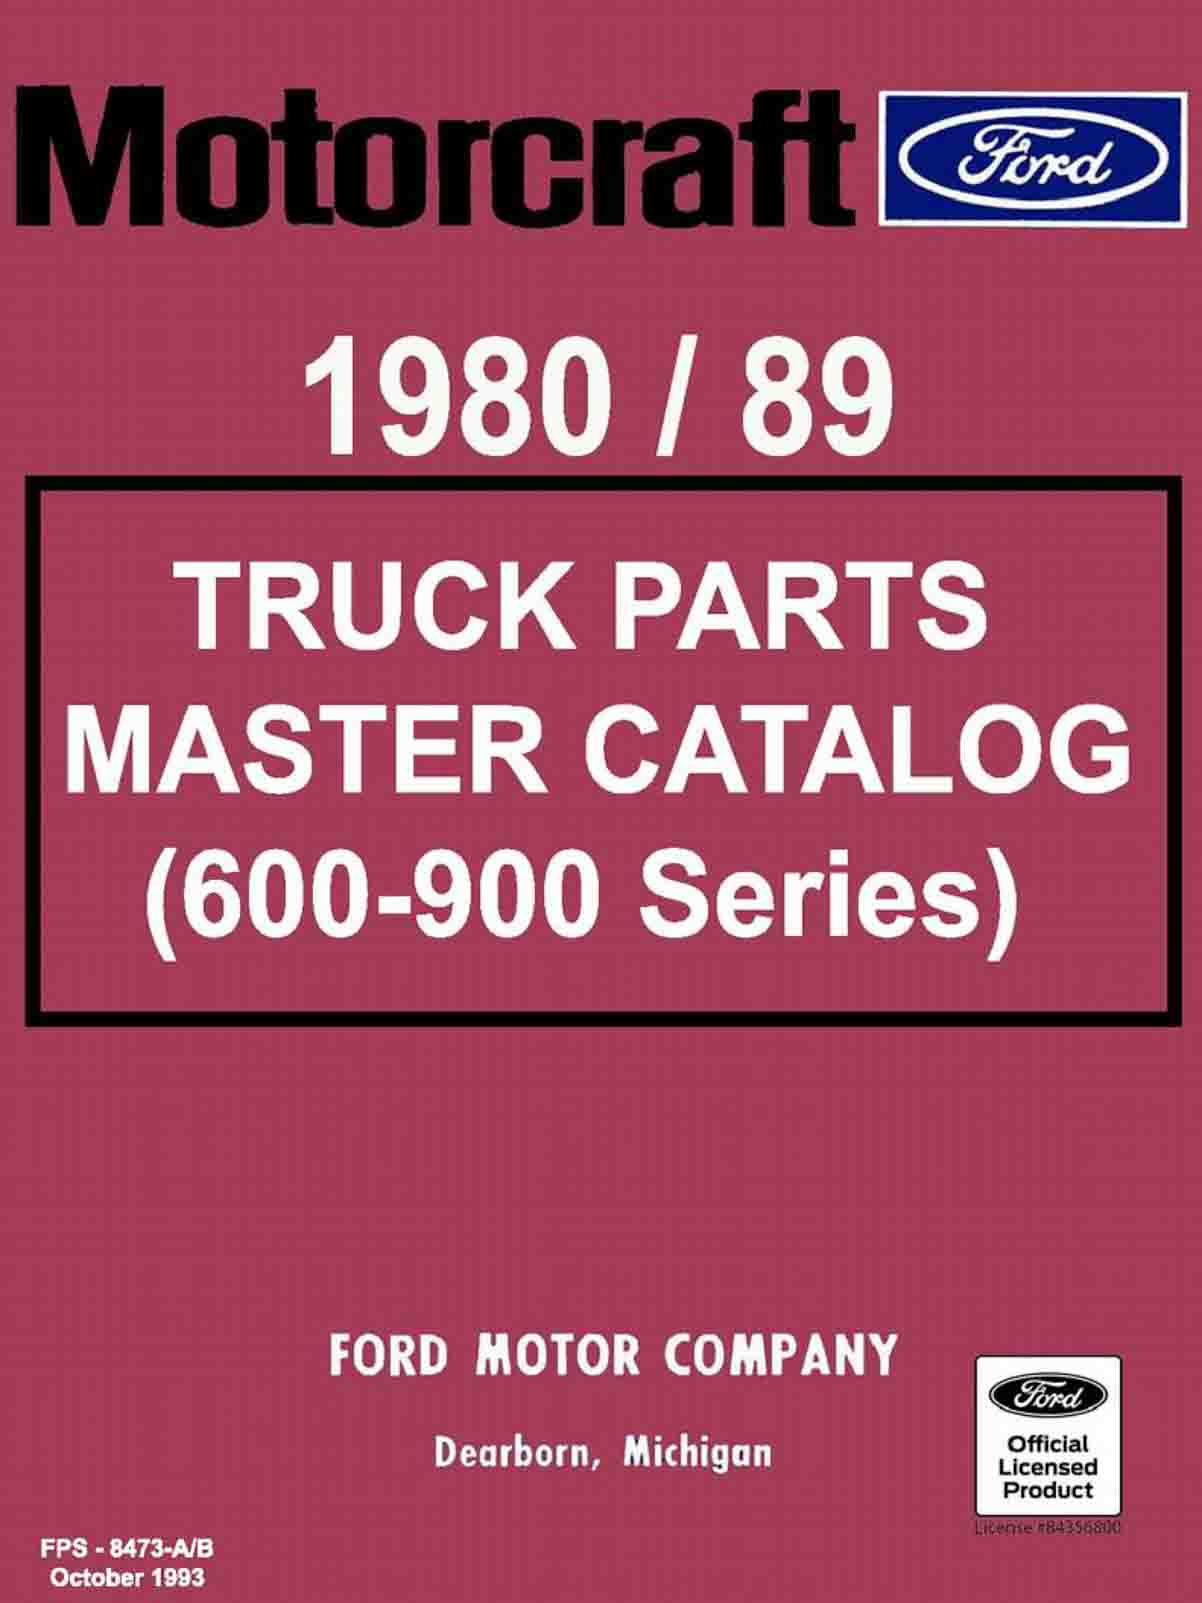 1980, 1981, 1982, 1983, 1984, 1985, 1986, 1987, 1988, and 1989 Ford Truck Parts Catalog (600-900 Series)